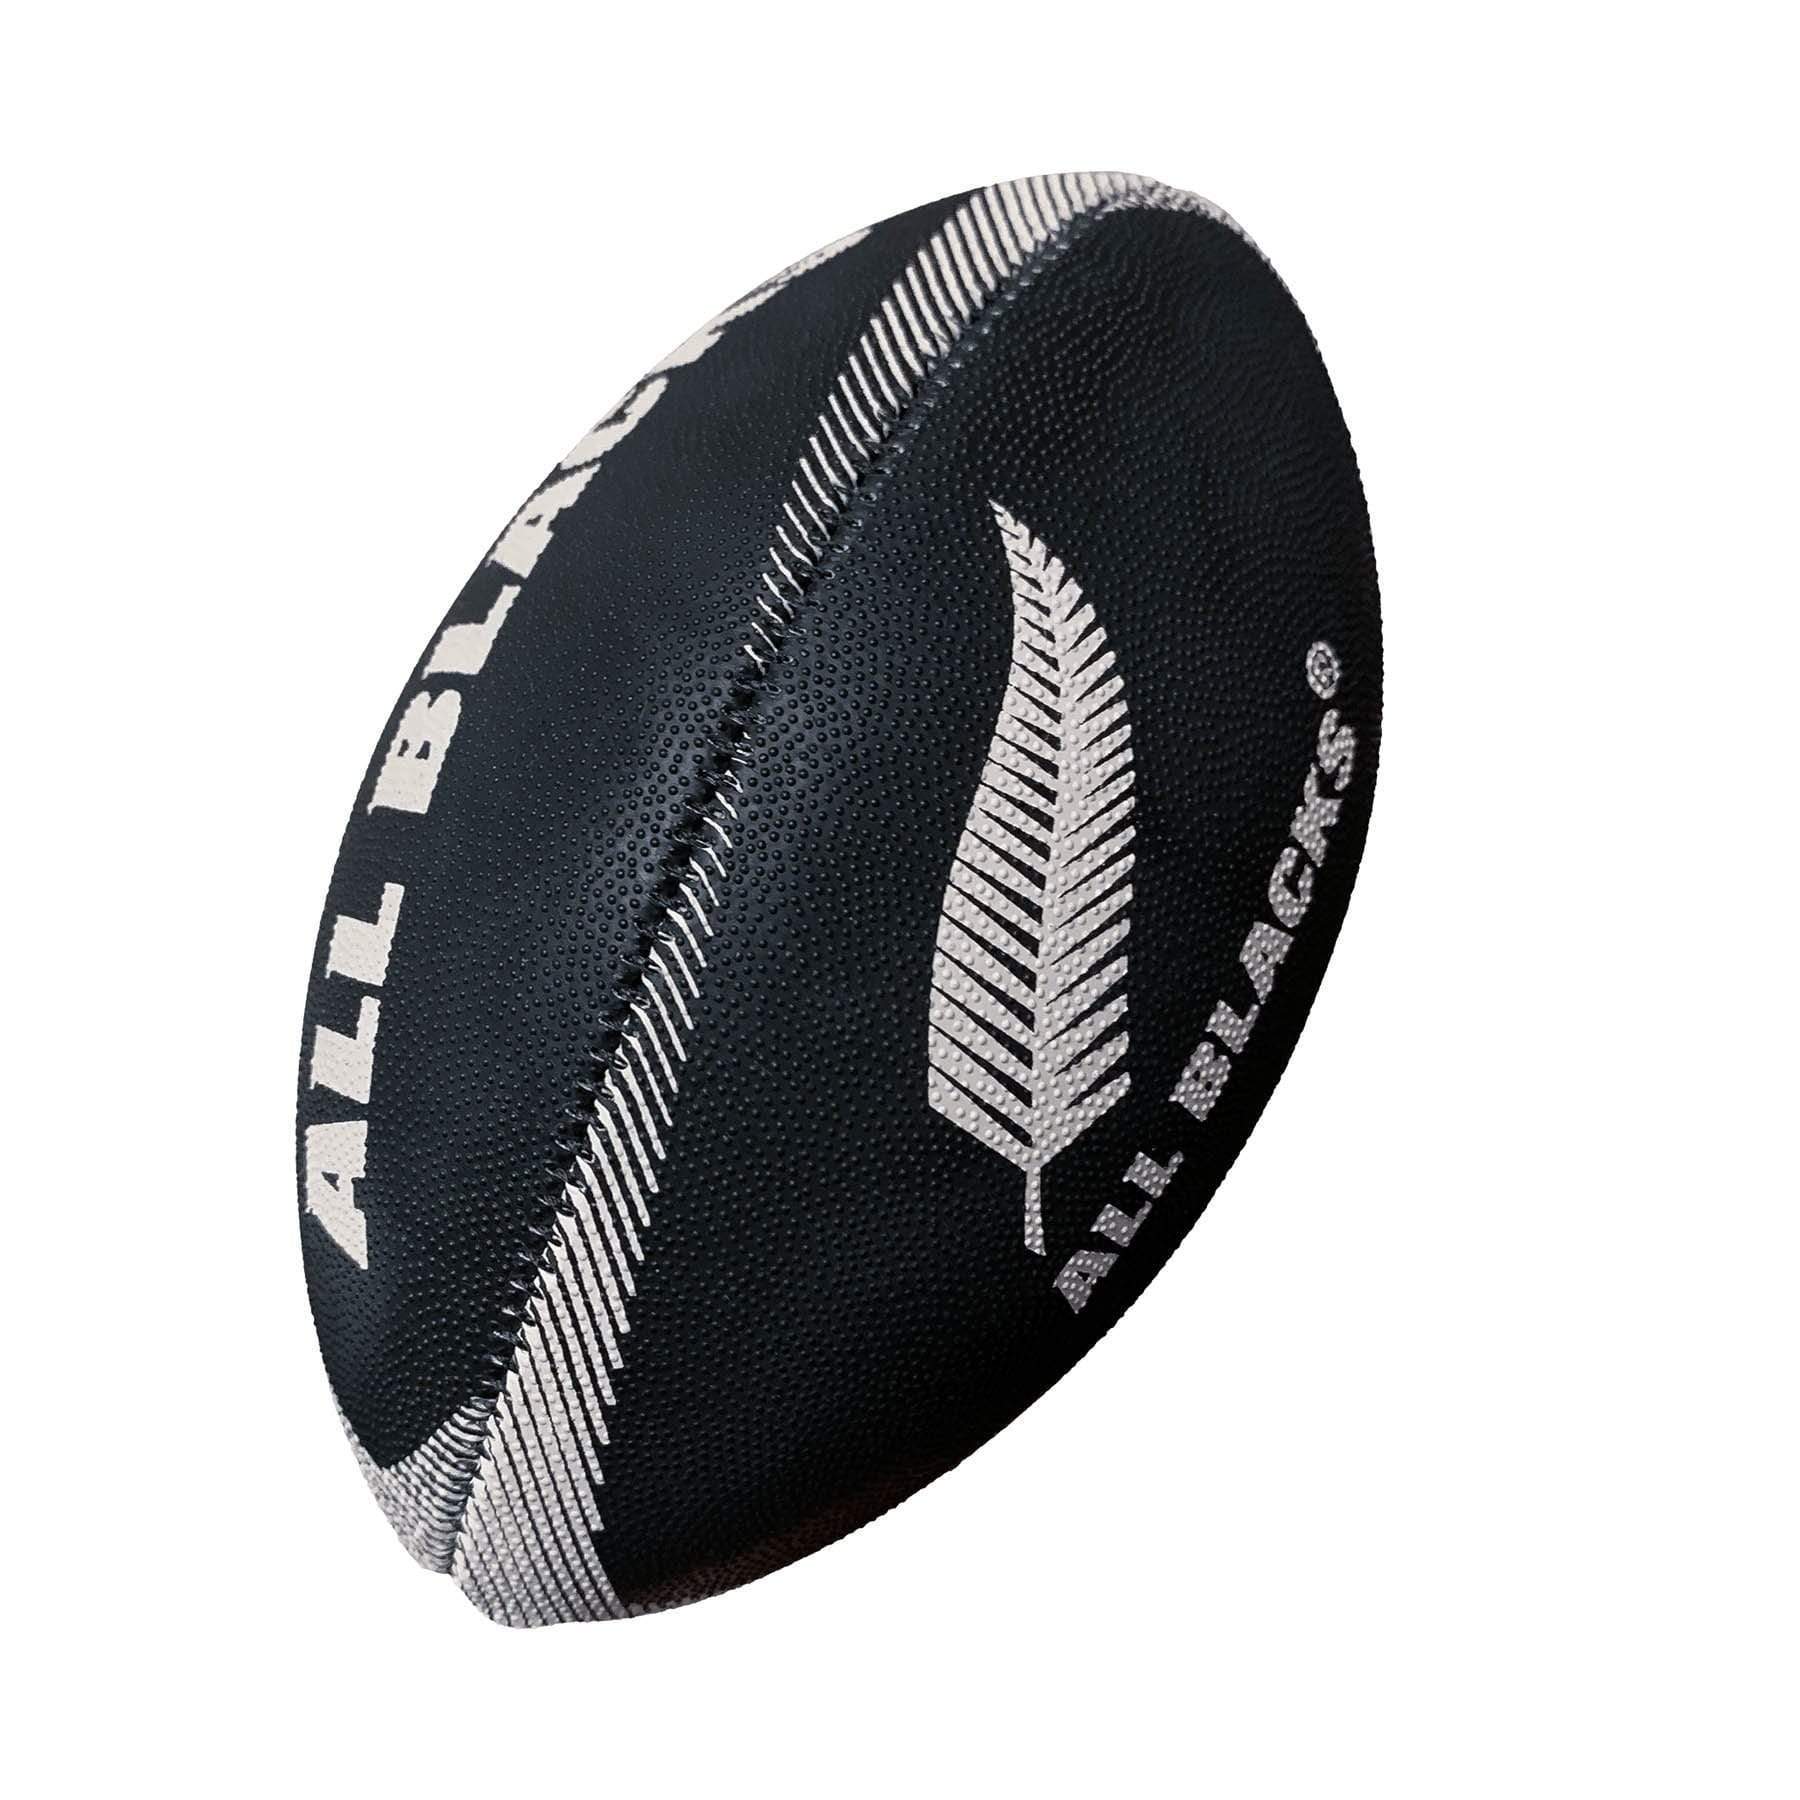 Rugby Imports Gilbert All Blacks Supporter Mini Rugby Ball